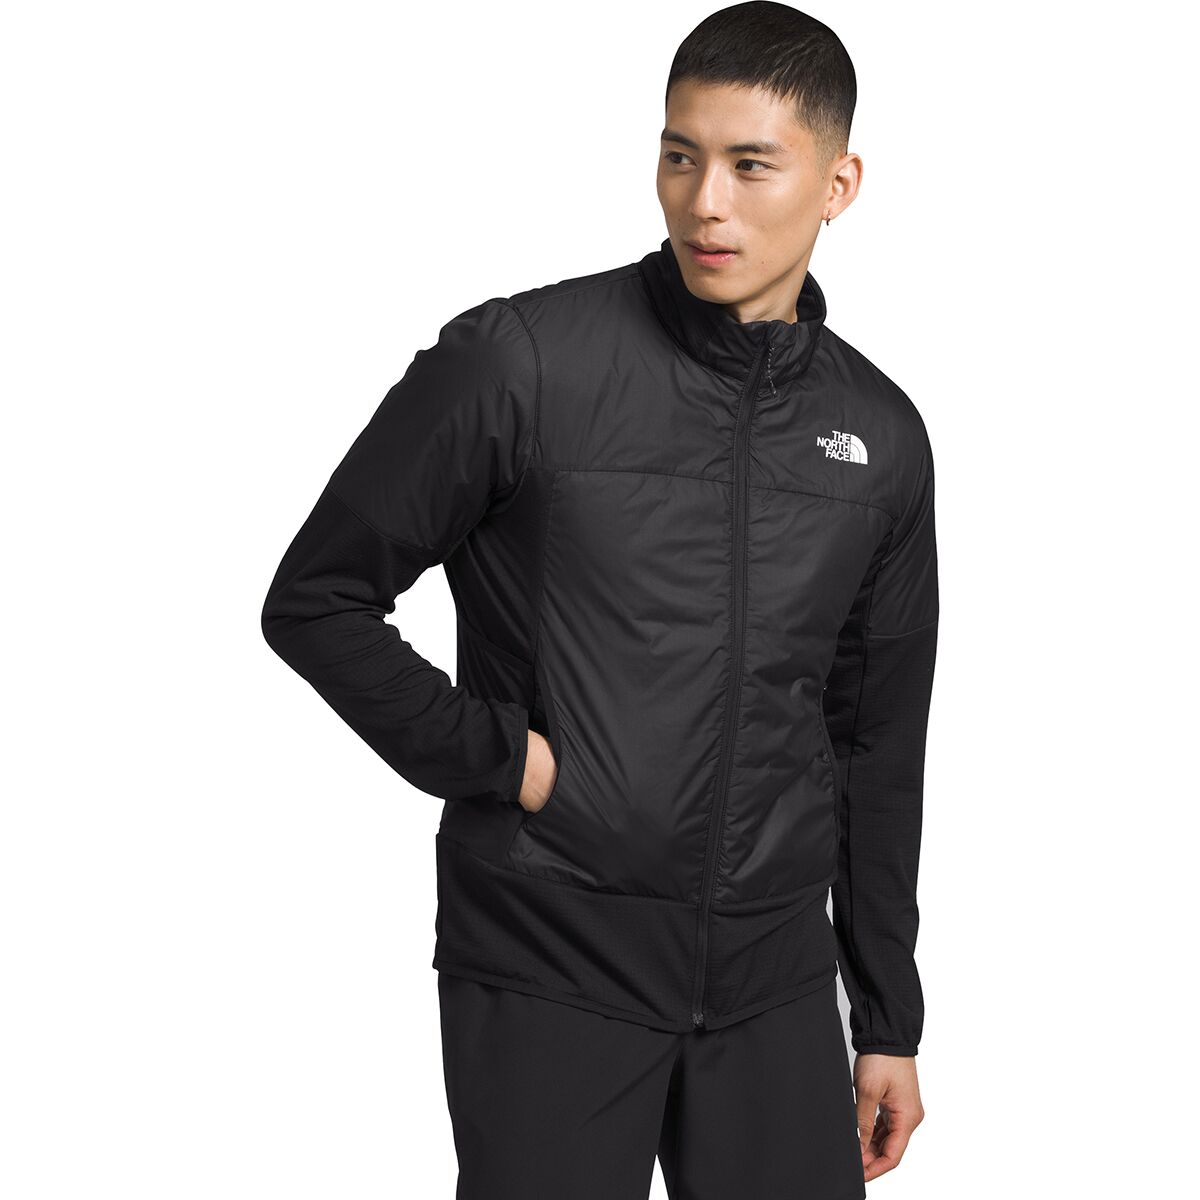 The North Face Winter Warm Pro Jacket - Men's